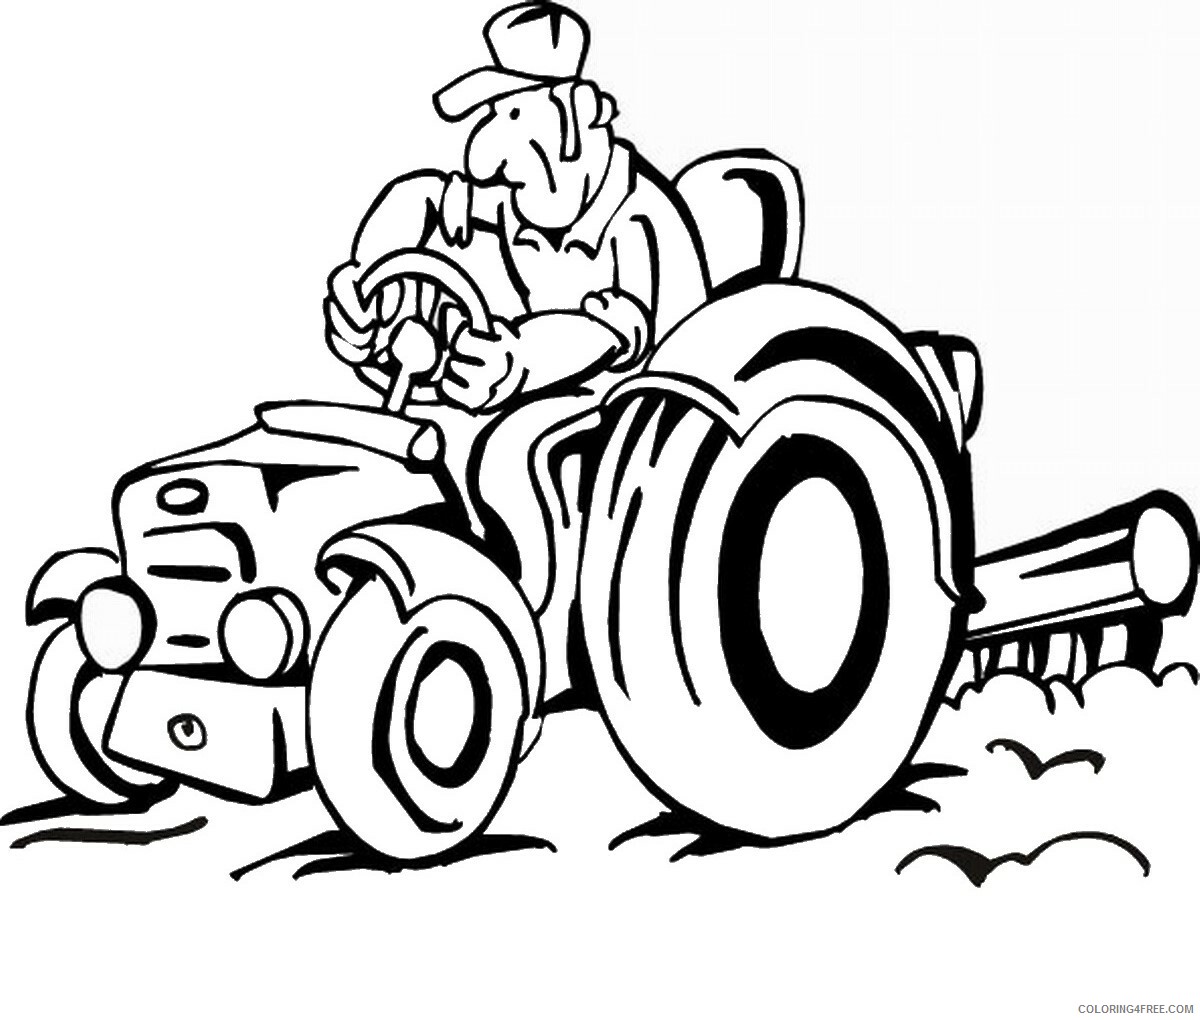 John Deere Tractor Coloring Pages for boys Printable 2020 0493 Coloring4free